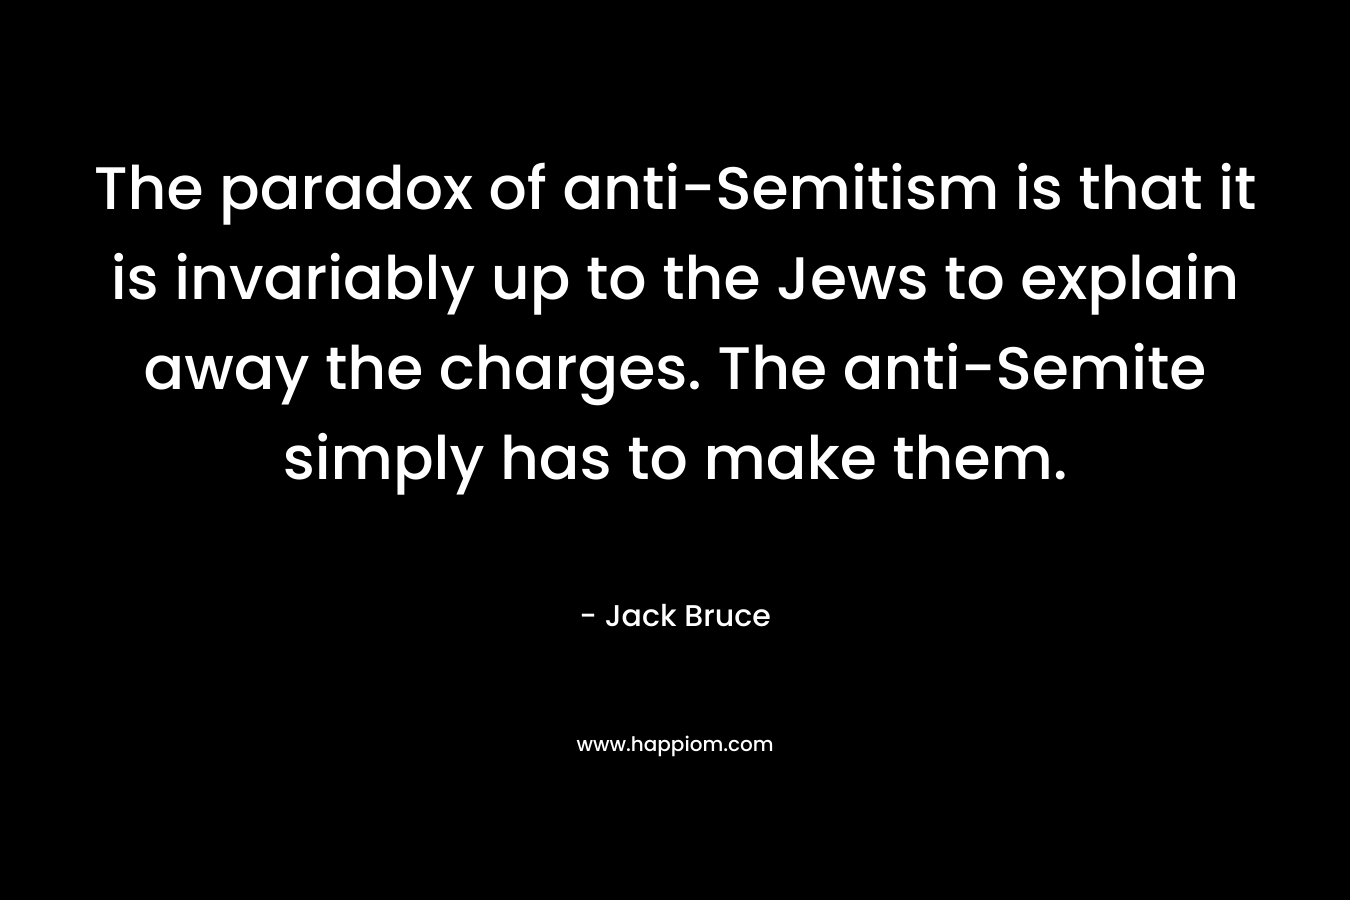 The paradox of anti-Semitism is that it is invariably up to the Jews to explain away the charges. The anti-Semite simply has to make them. – Jack Bruce